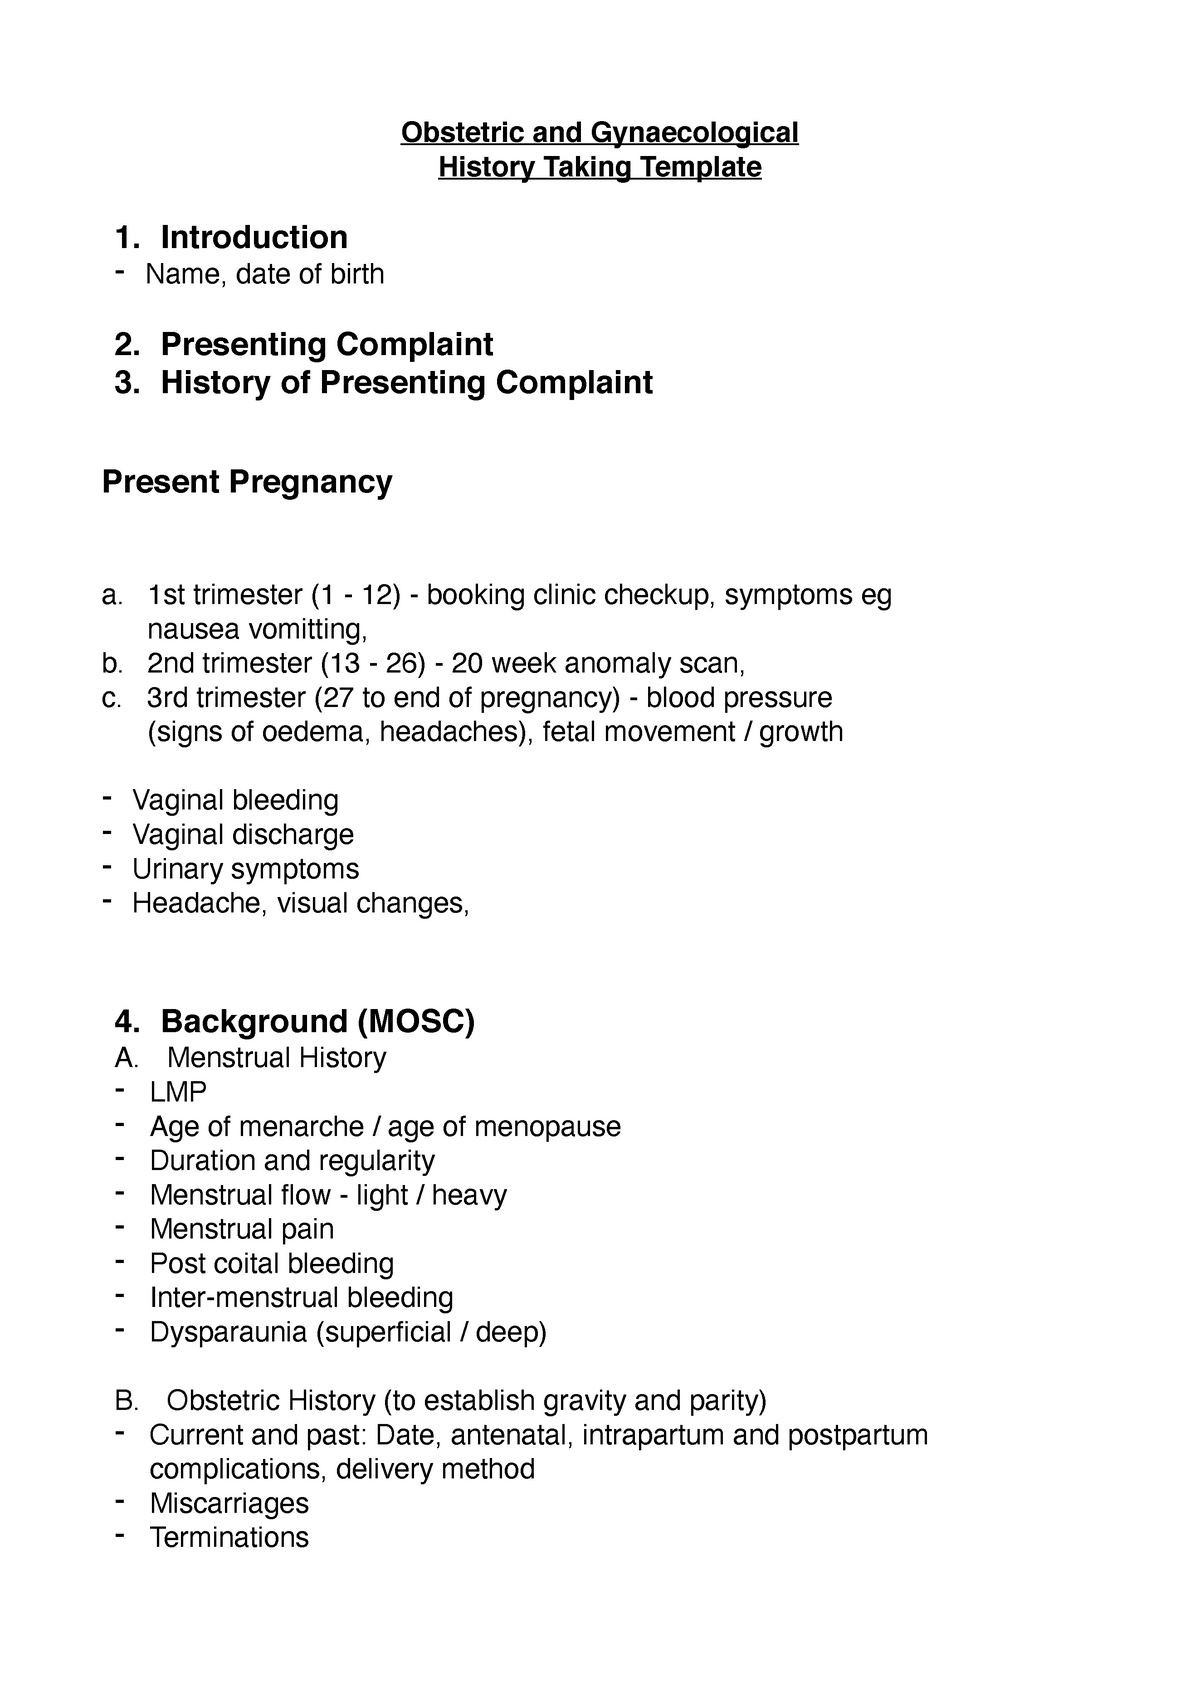 dissertation topics in obstetrics and gynaecology nursing